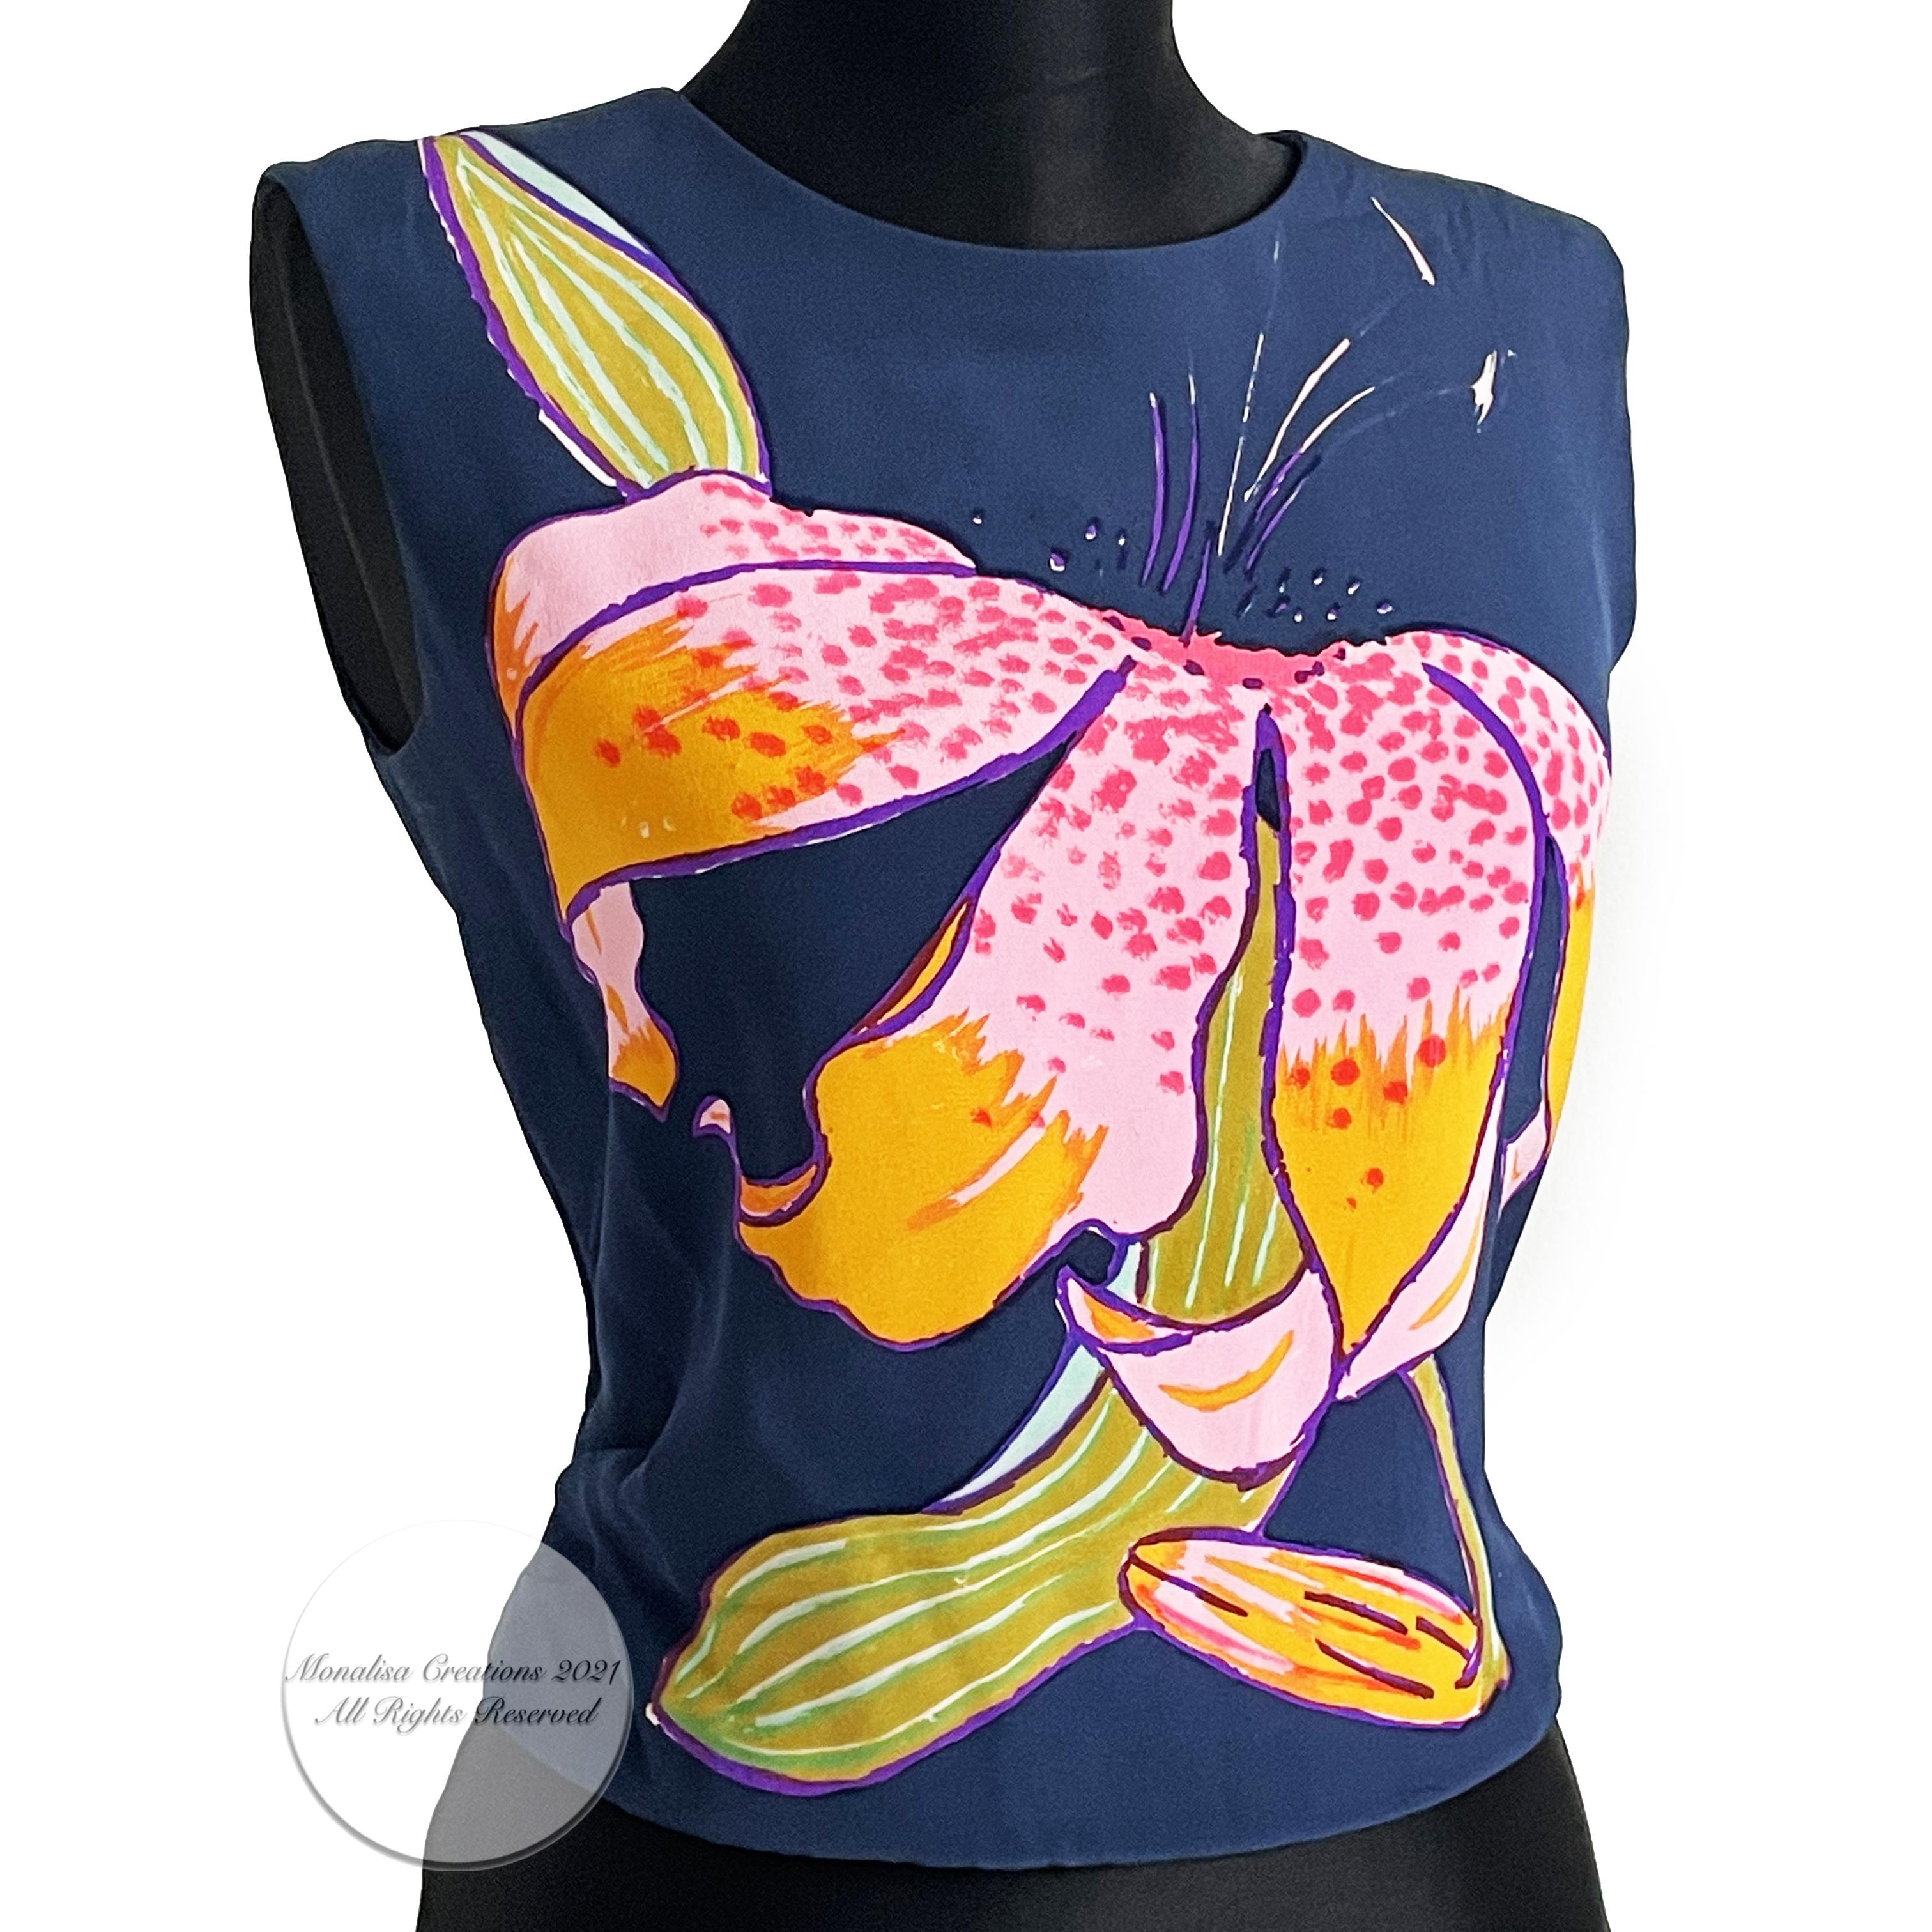 Authentic, preowned, vintage haute couture Christian Lacroix Hand Painted Lily Silk Blouse, 90s. Rare find, numbered, true haute couture. Made from crisp navy silk, with a bold hand-painted lily, pleating at the sides & fastens in back with several